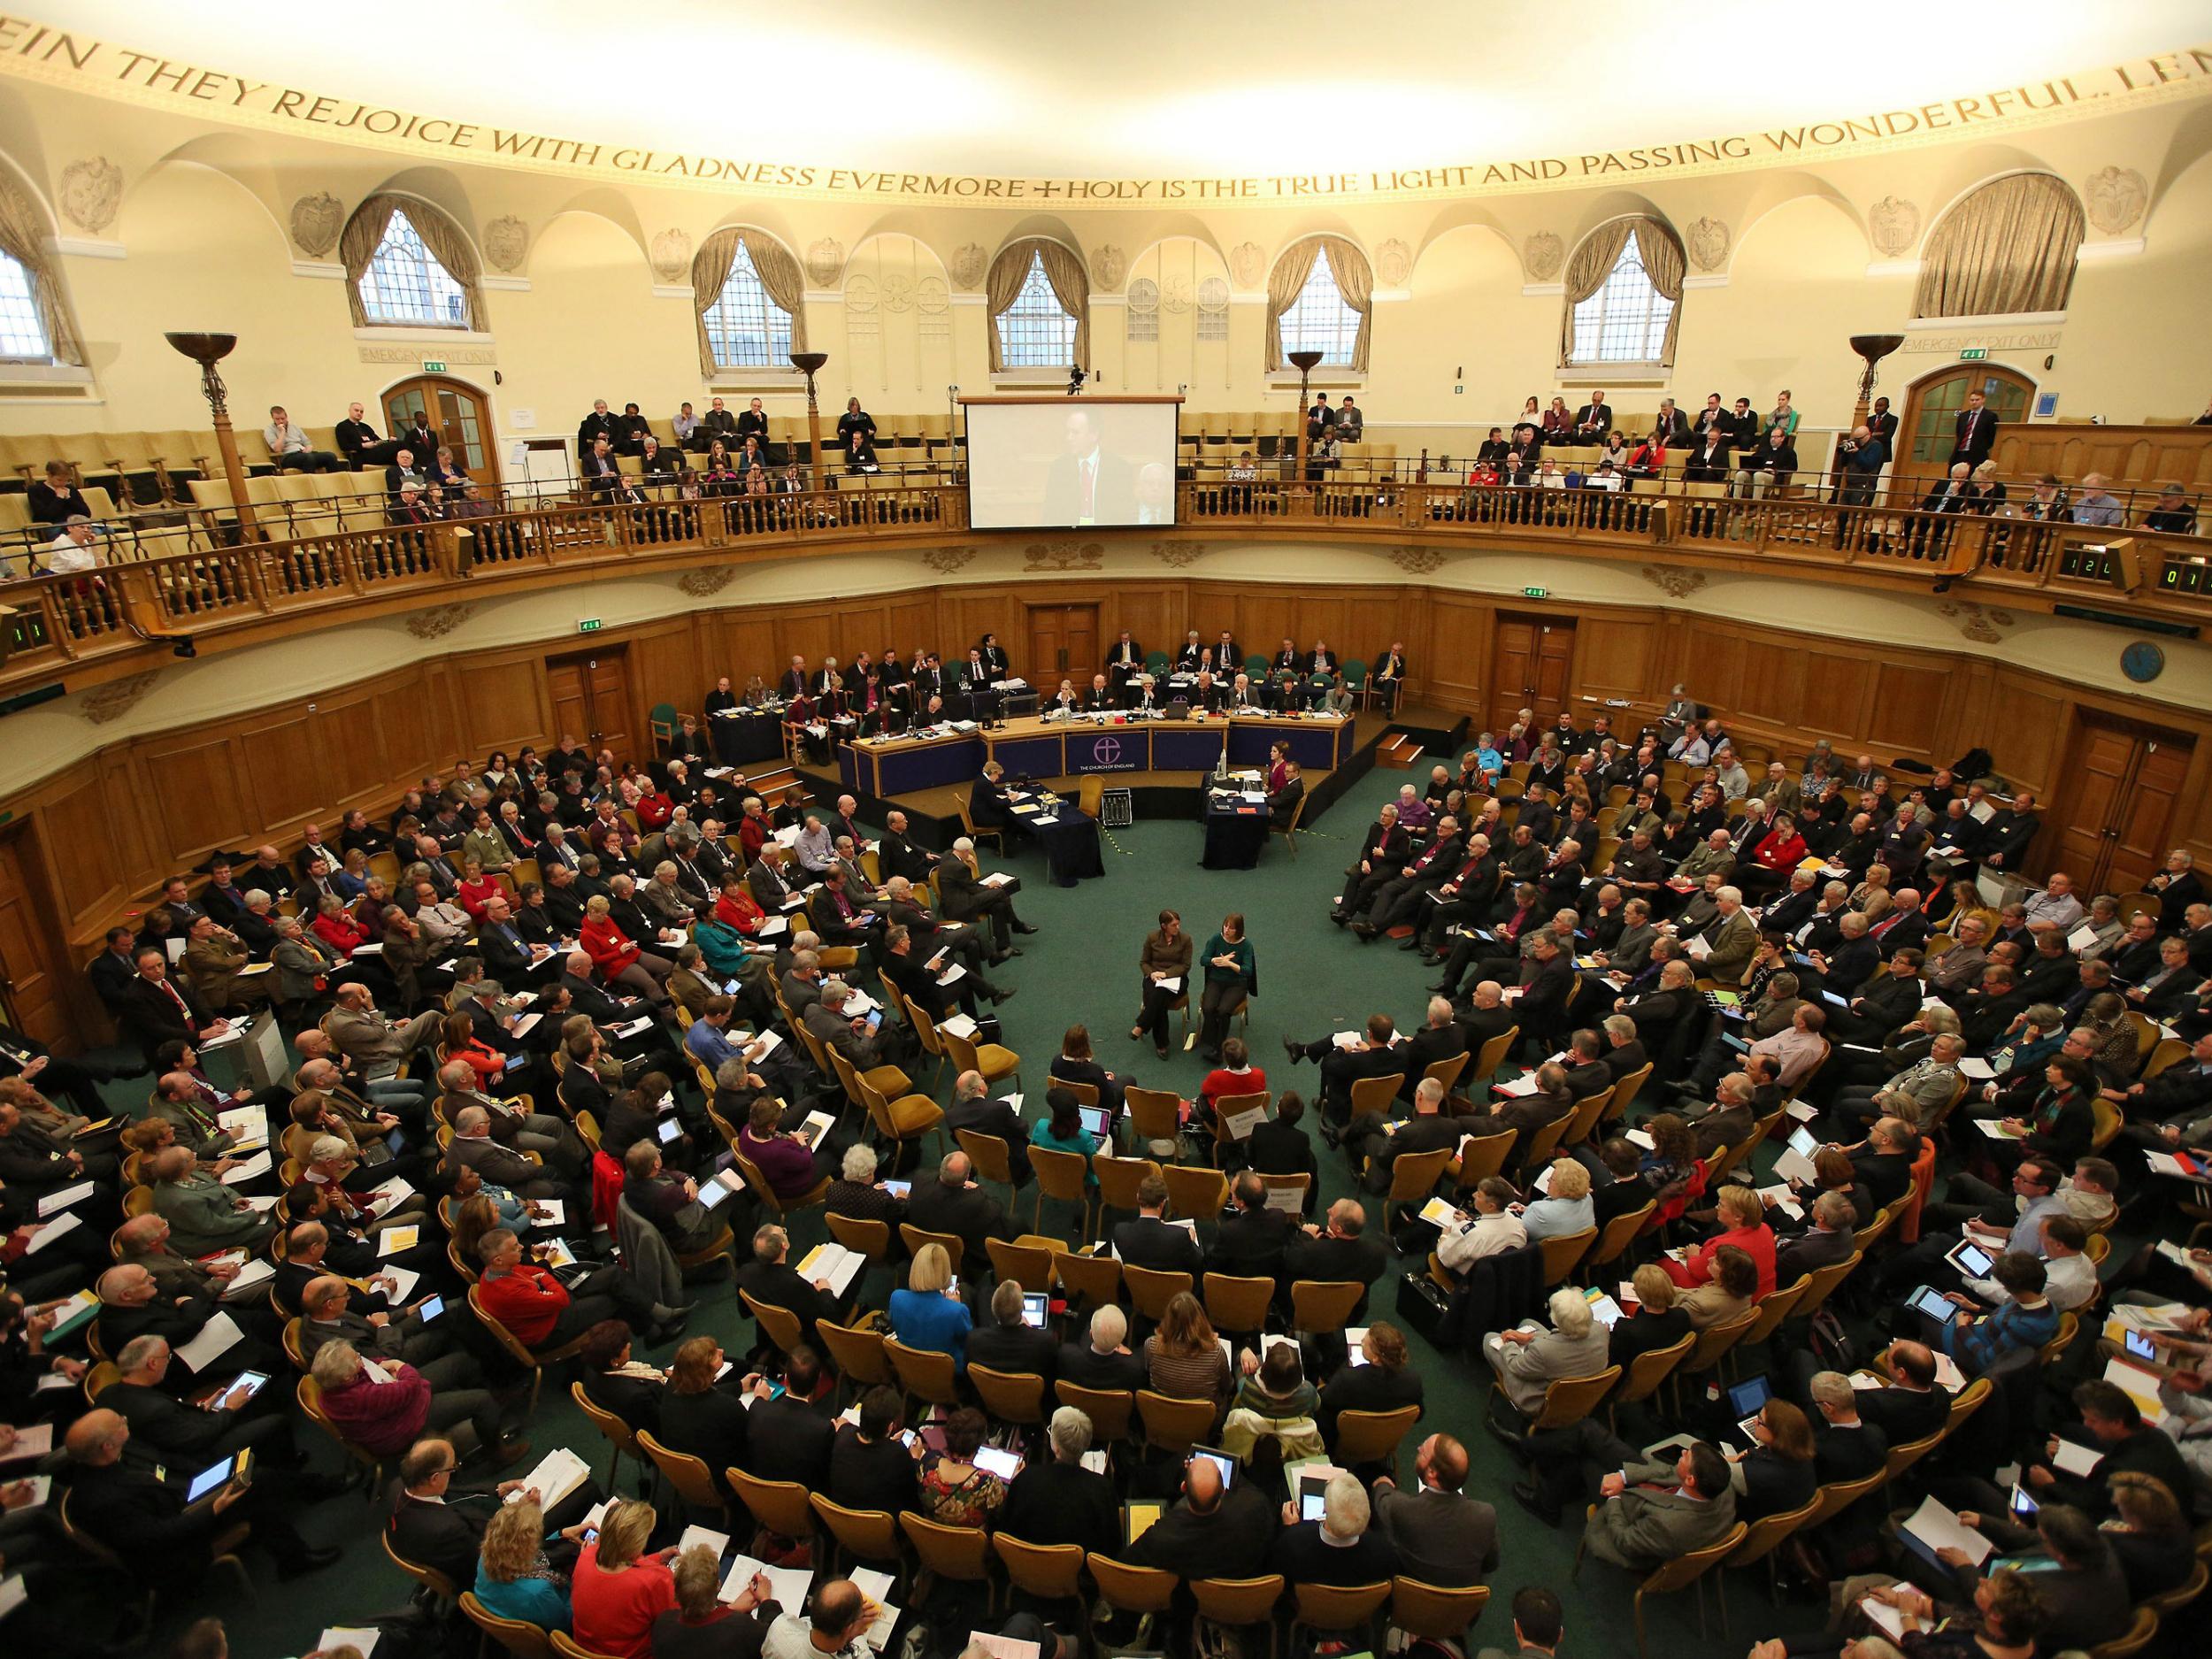 The Church Synod will consider plans to reform its approach to homosexuality